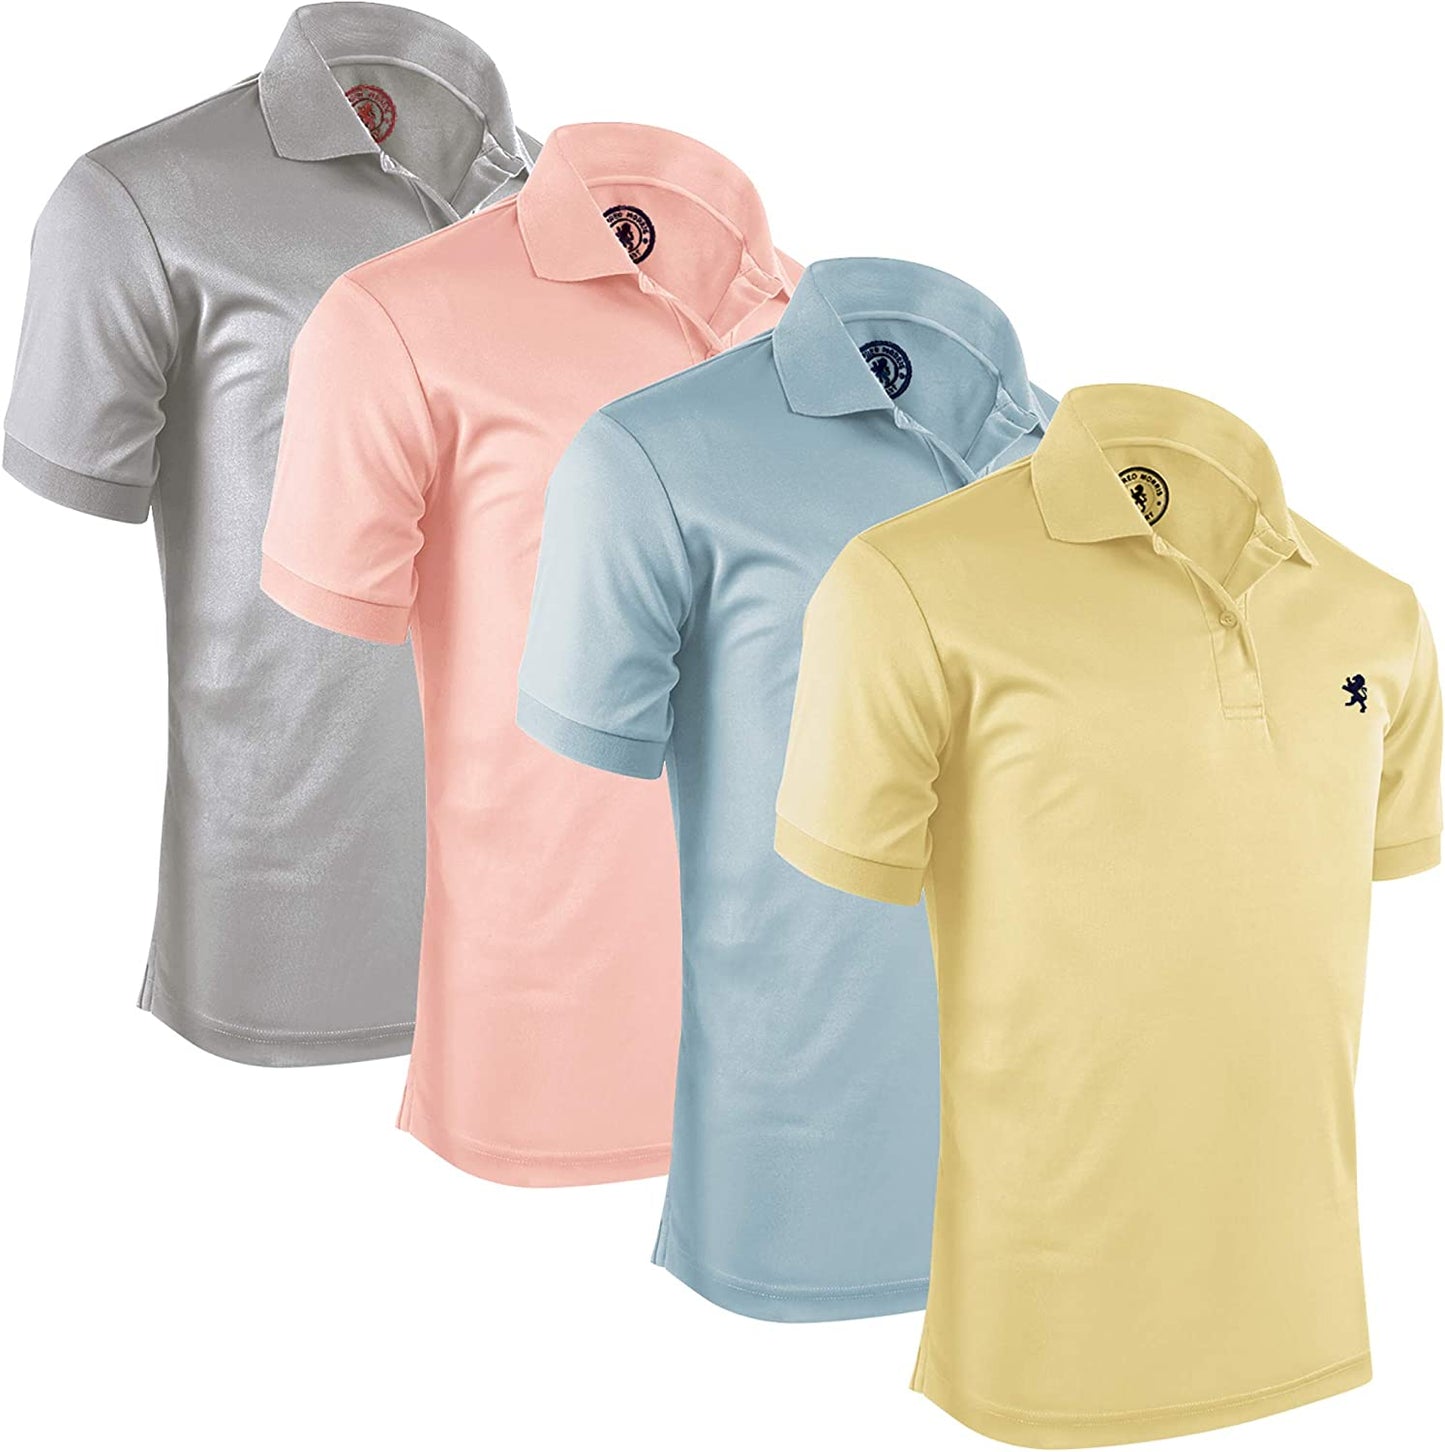 Mens Striped Short Sleeve Polo Shirts 4 Pack